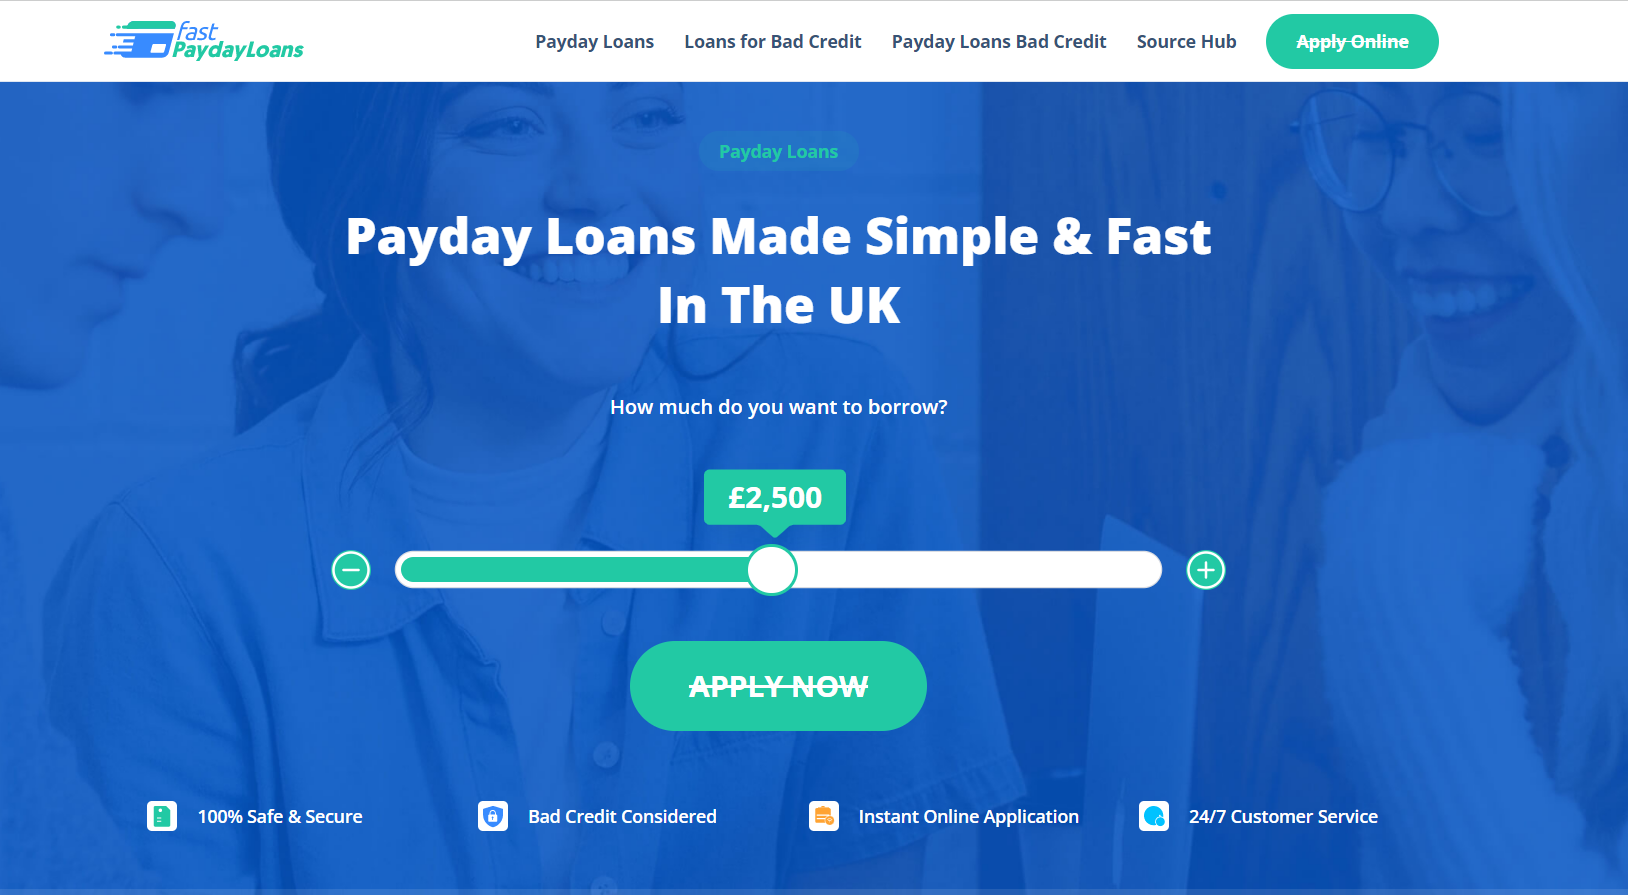 Credit Loans in the UK